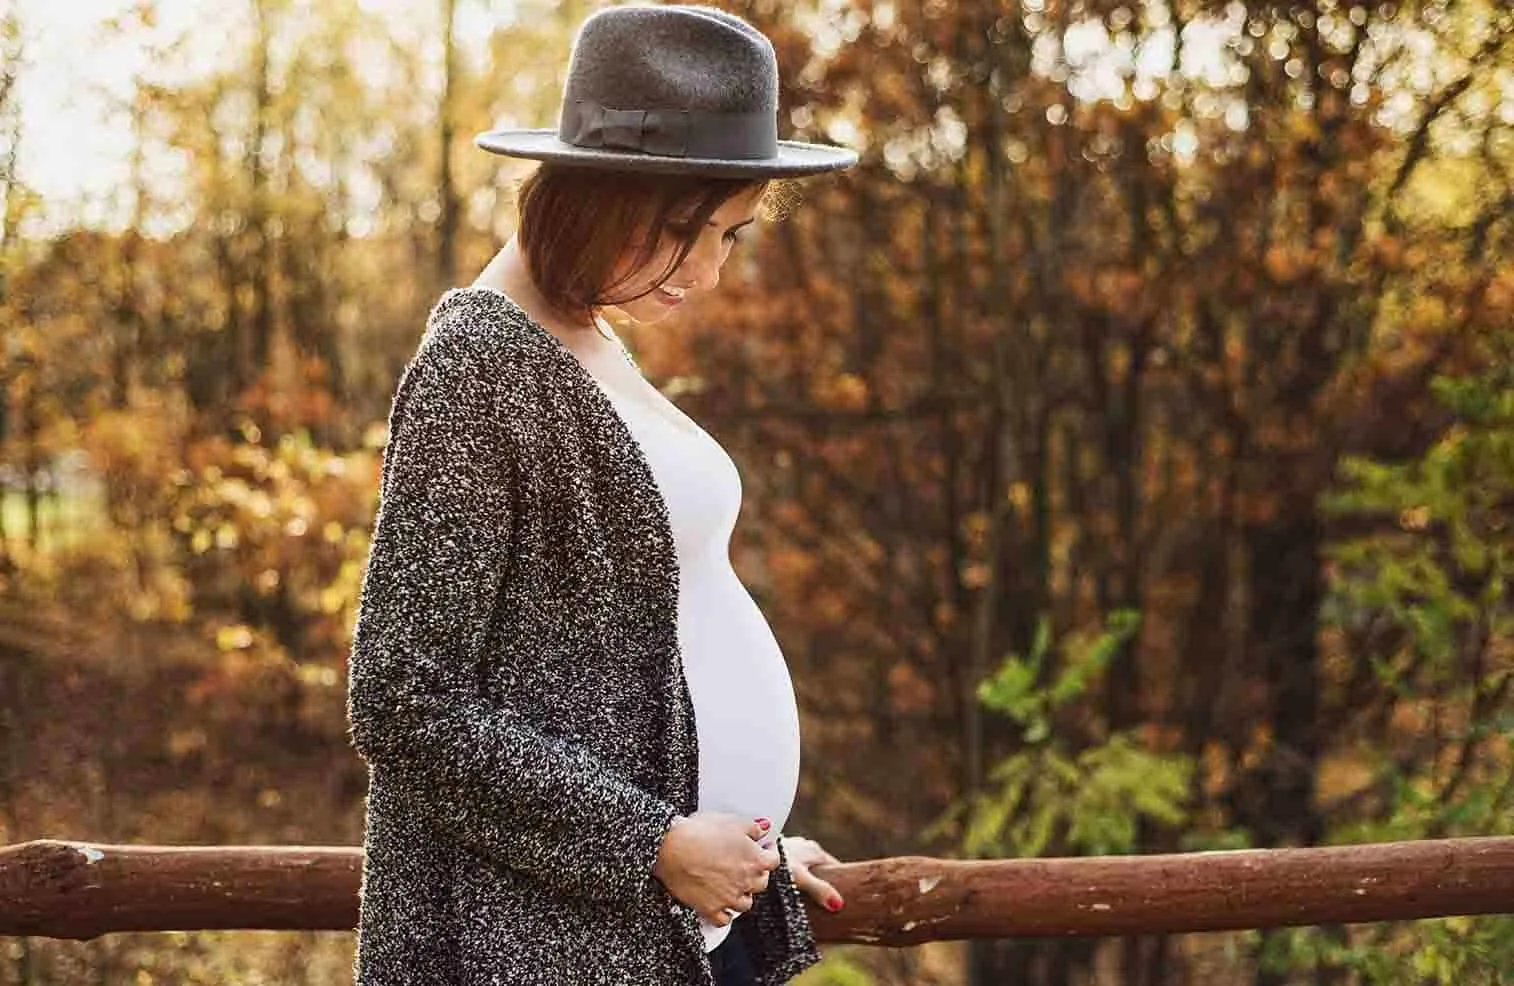 Has it been your goal to stay active during pregnancy but you're just not sure how to go about it? Here's some options to add movement to your daily living.